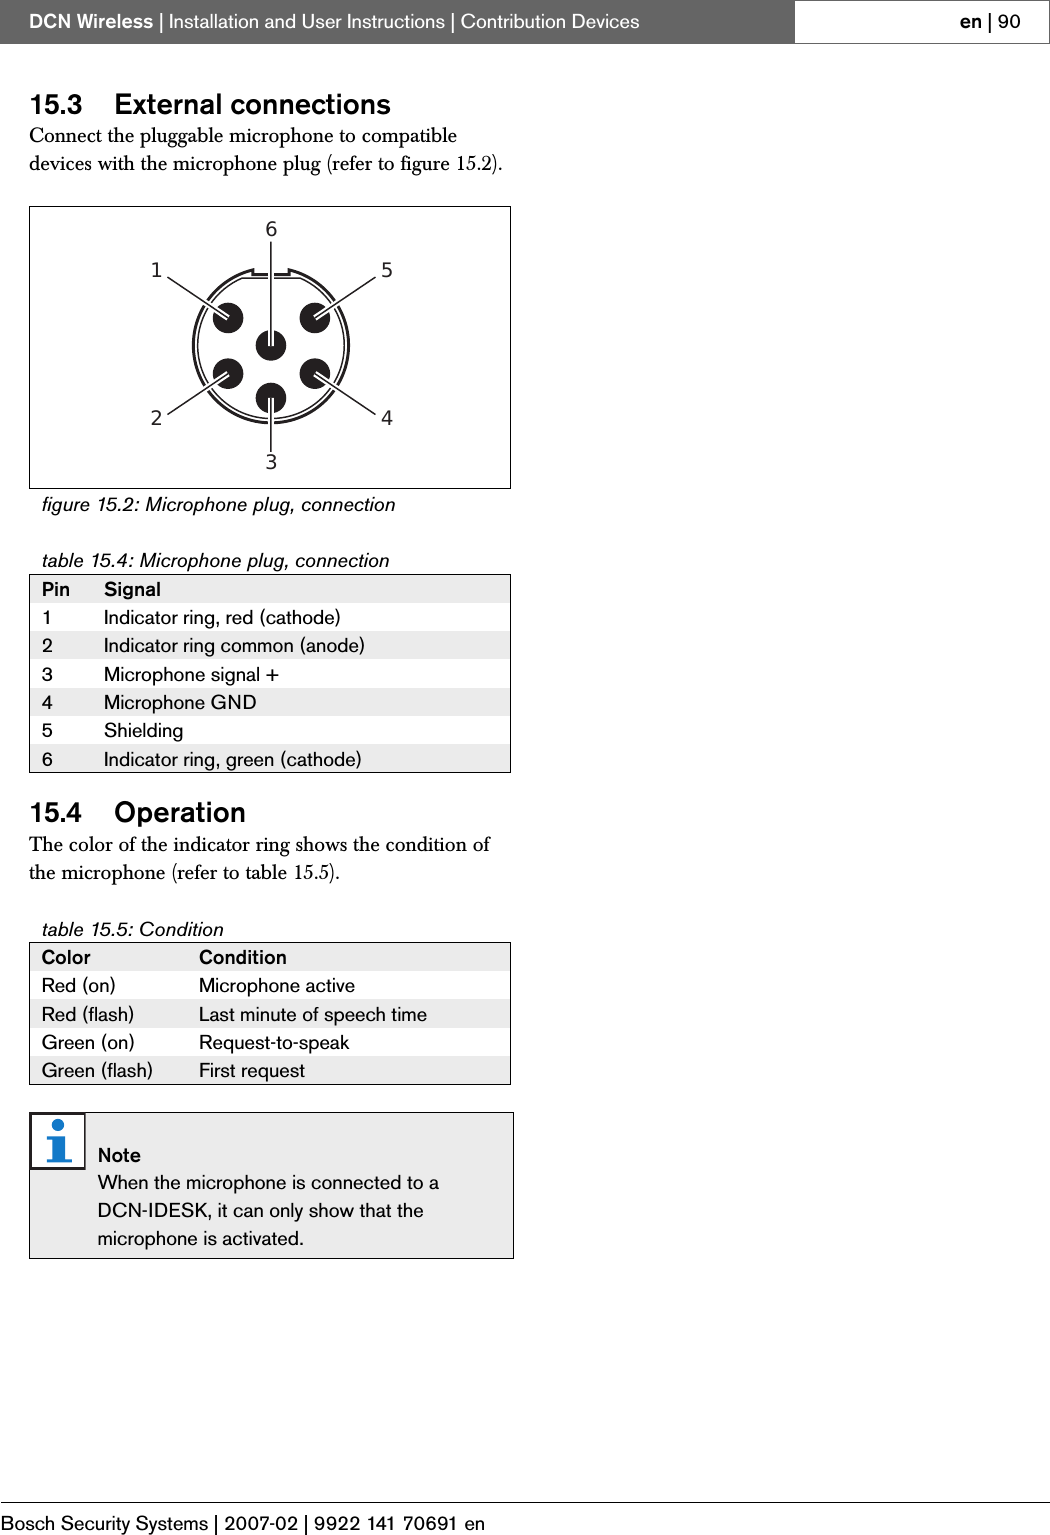 Page 61 of Bosch Security Systems DCNWAP Wireless Access Point User Manual Part 2